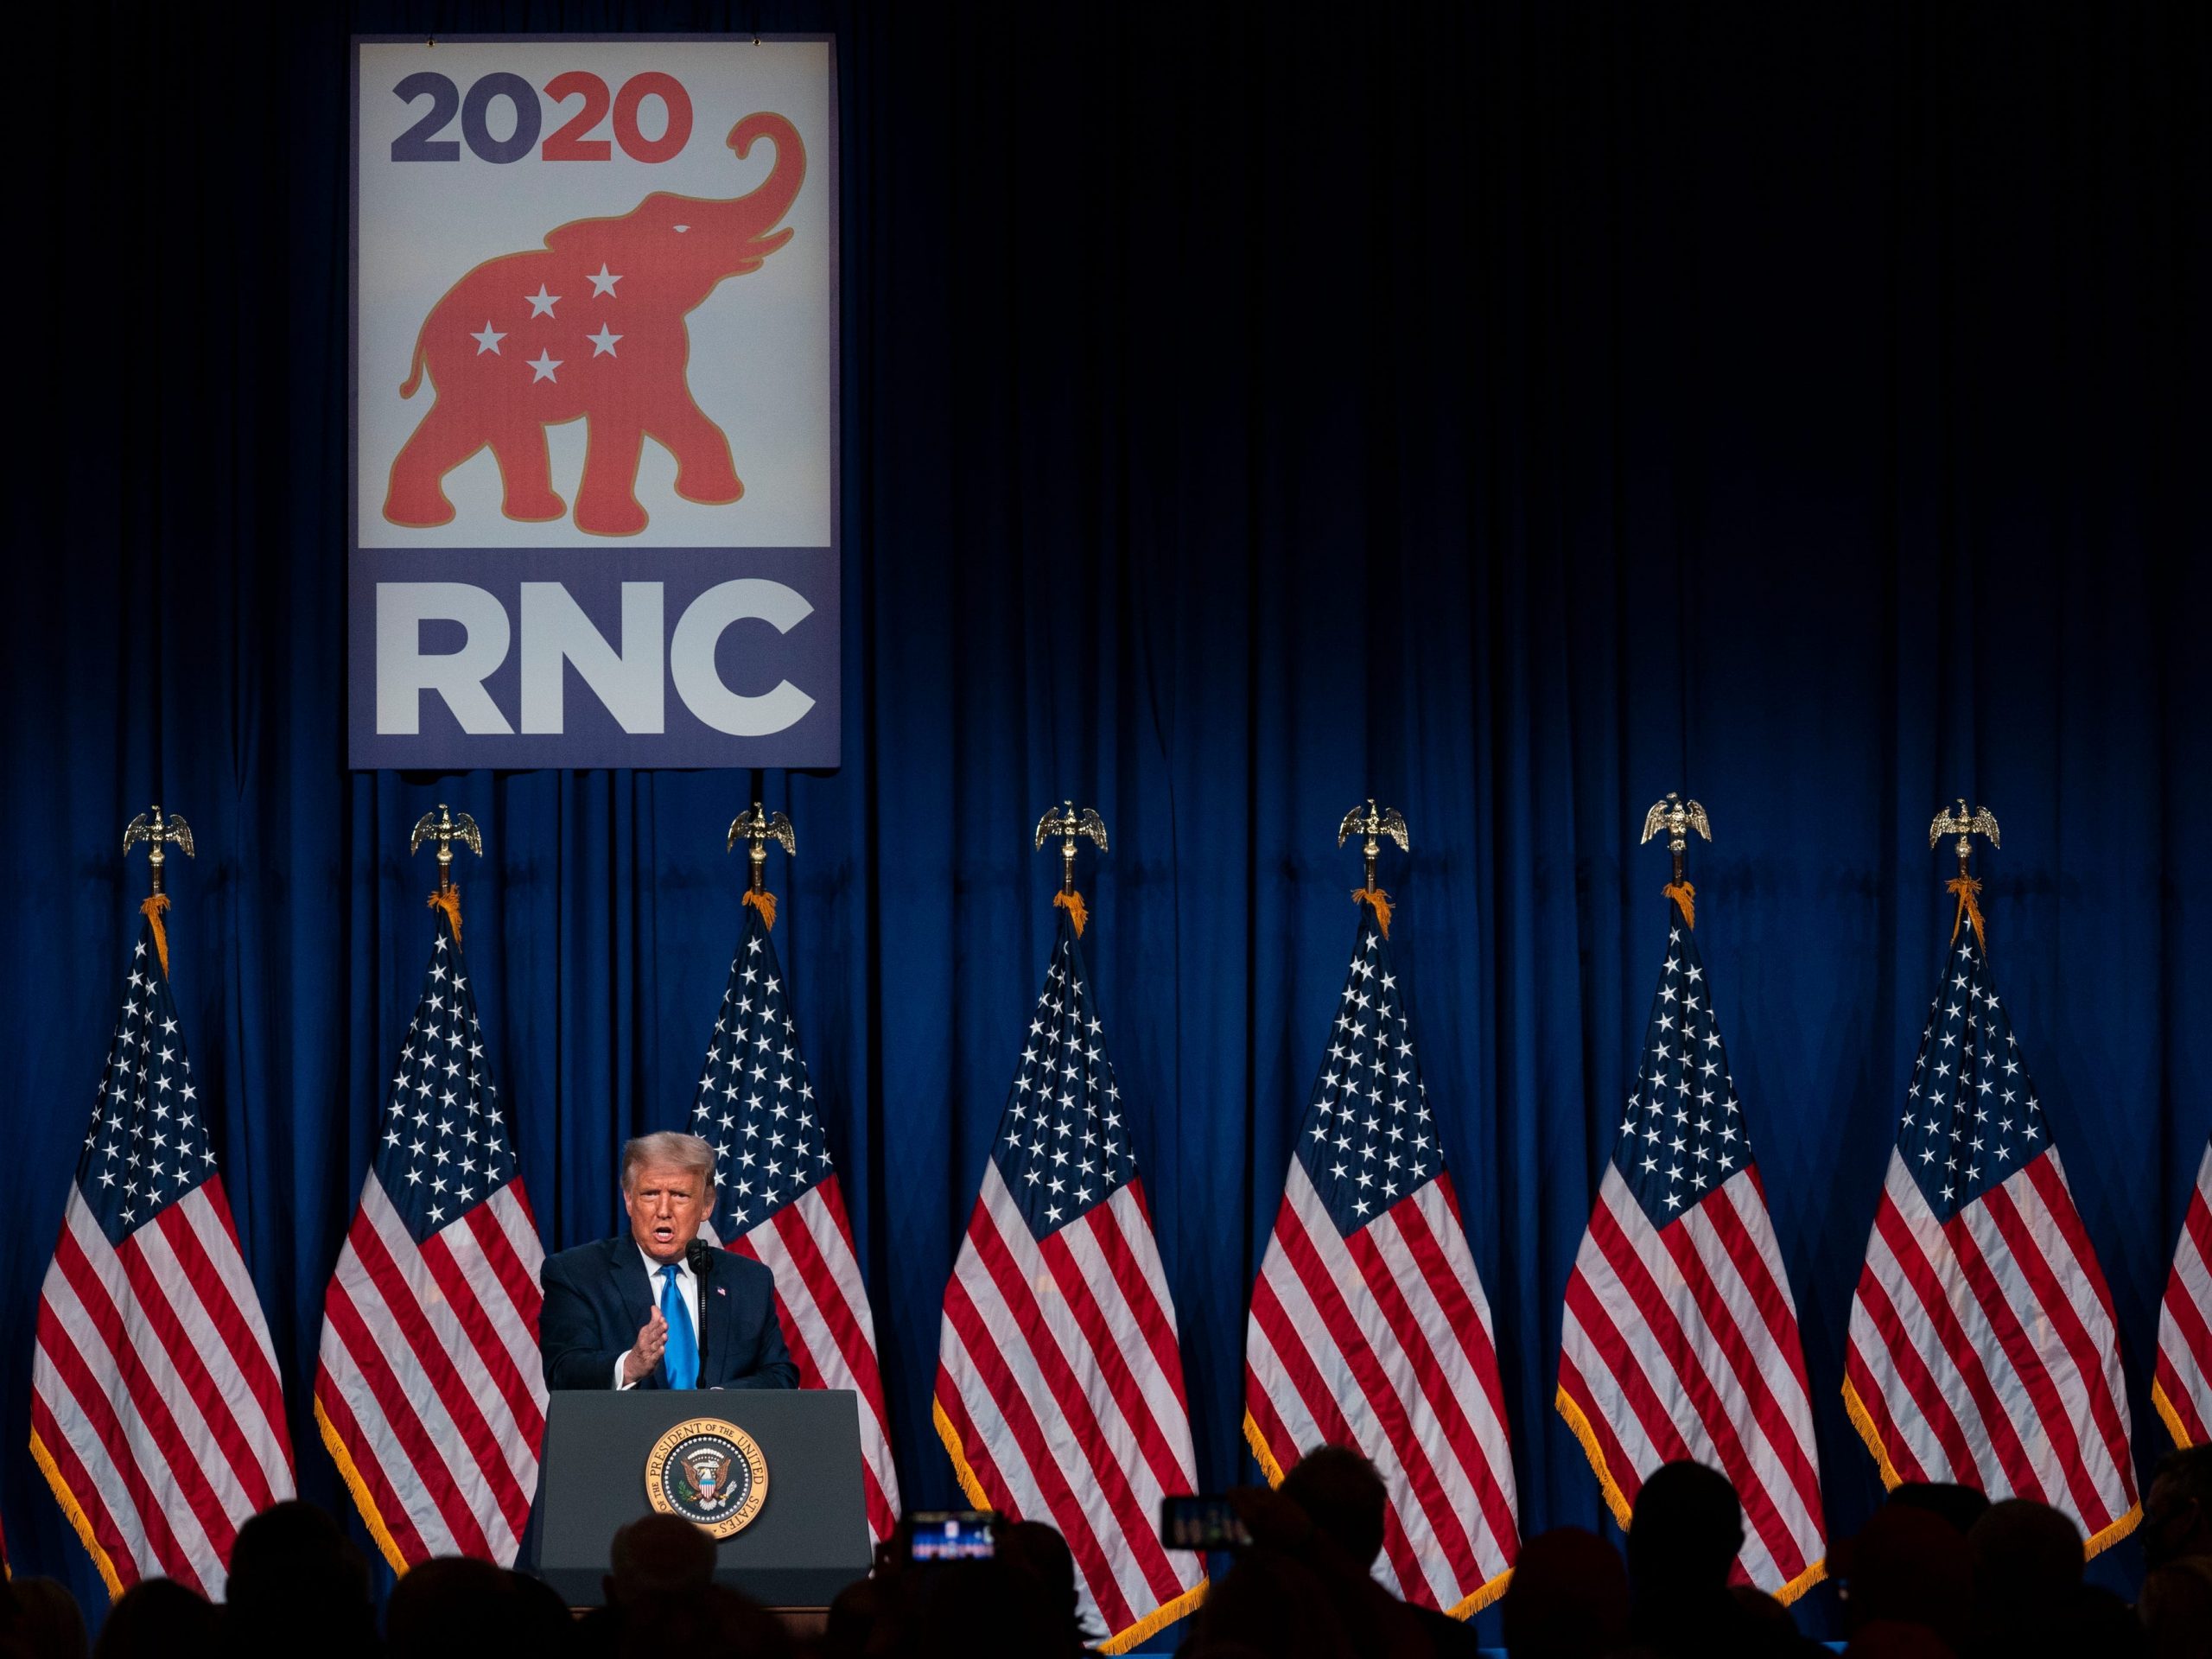 Donald Trump speaks in front of an RNC sign and many American flags.